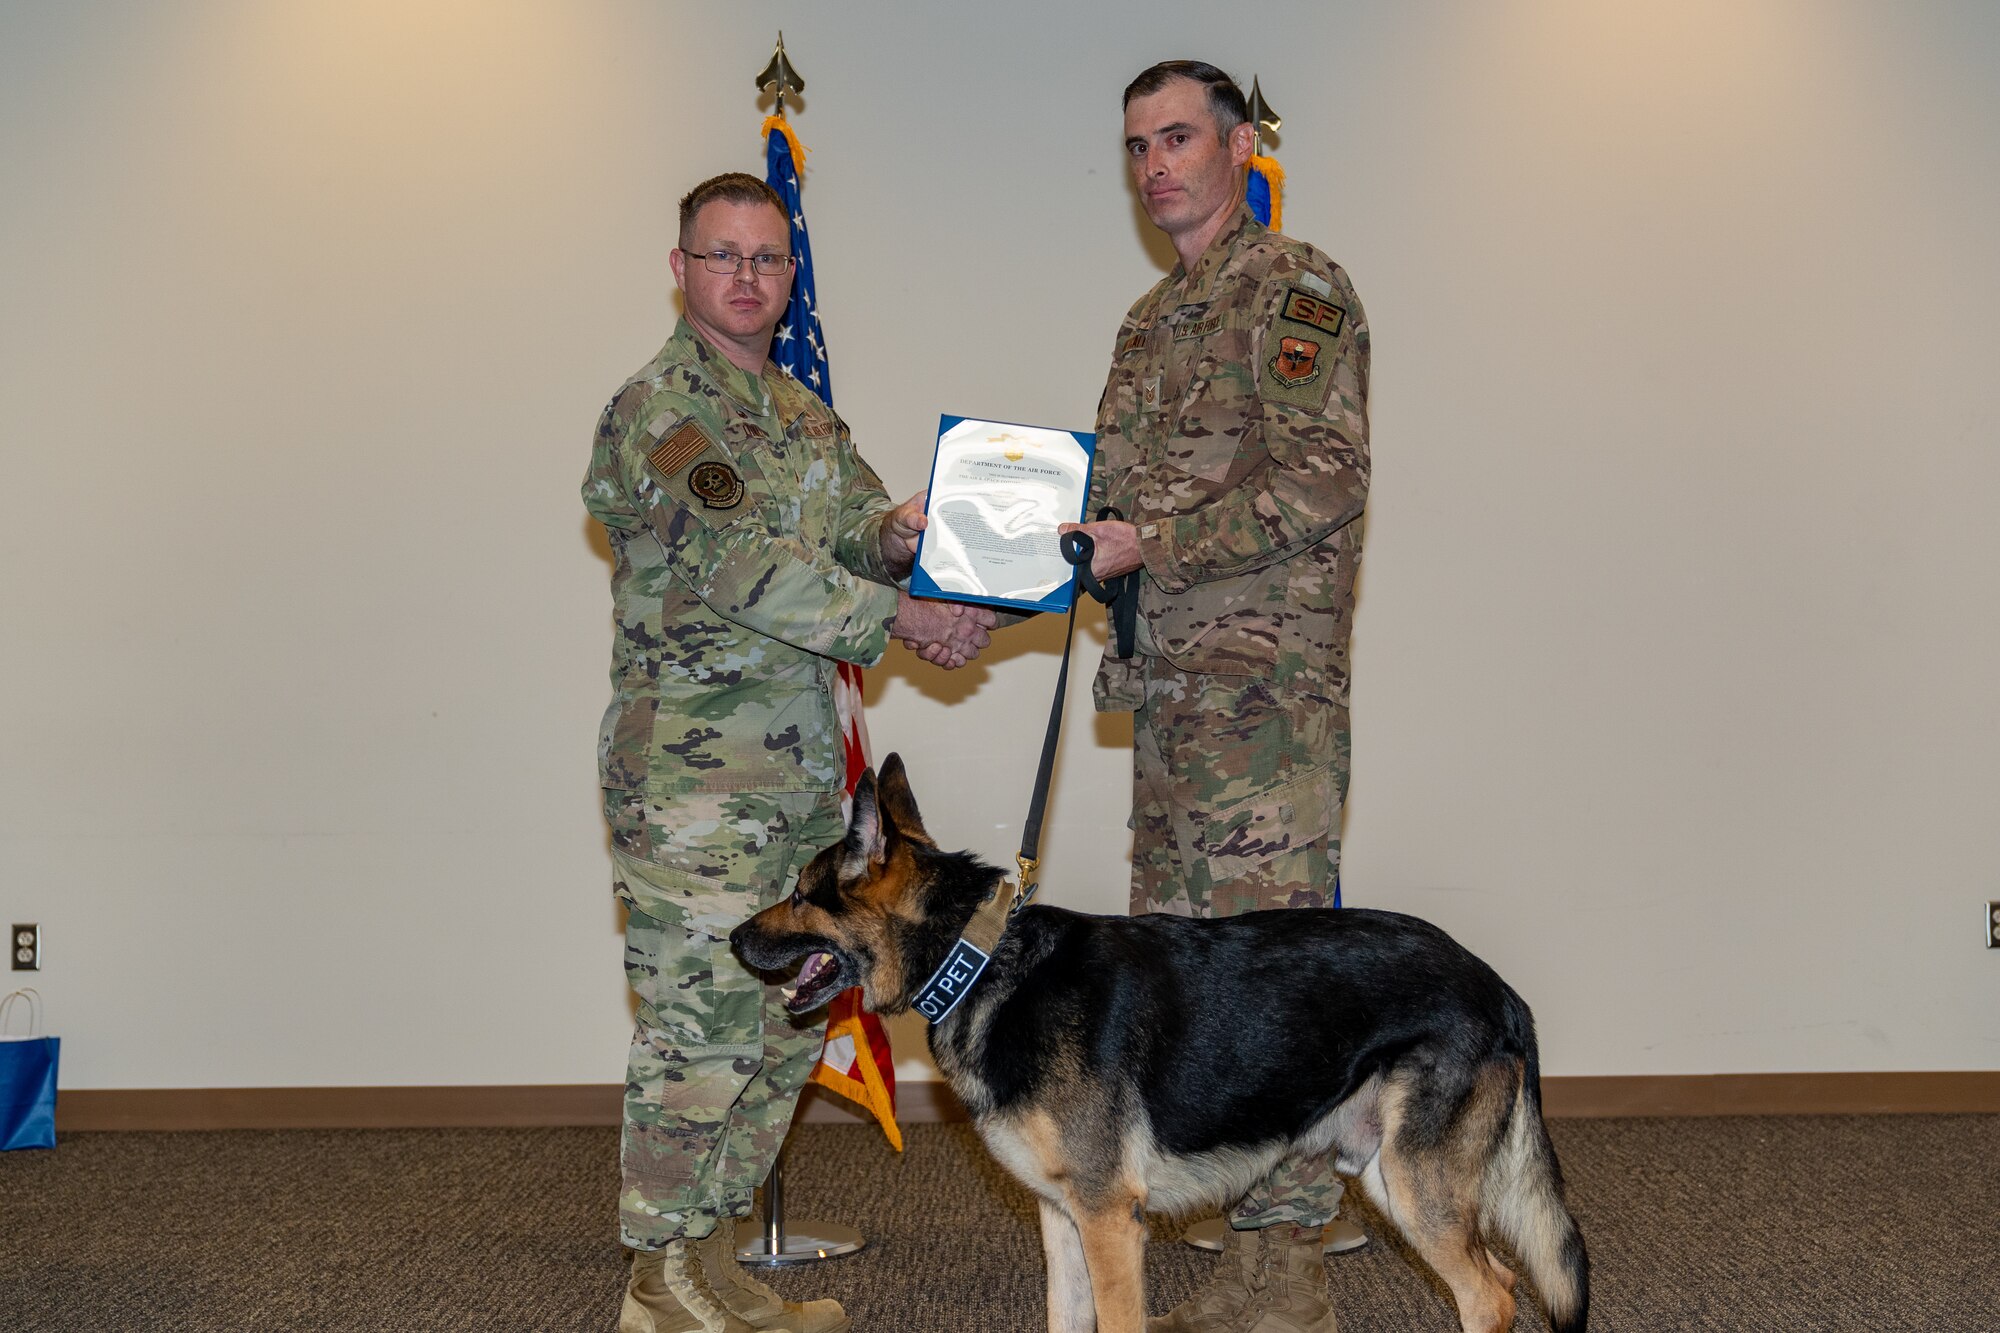 U.S. Air Force Maj. Shaun O’Dell, 81st Security Forces Squadron, defense force commander, and Technical Sgt. Garon Metcalf, 81st SFS, NCO in charge, pose with Gamma’s, 81st SFS, military working dog, retirement certificate during his retirement ceremony at Keesler Air Force Base, Mississippi, Aug. 25, 2023.